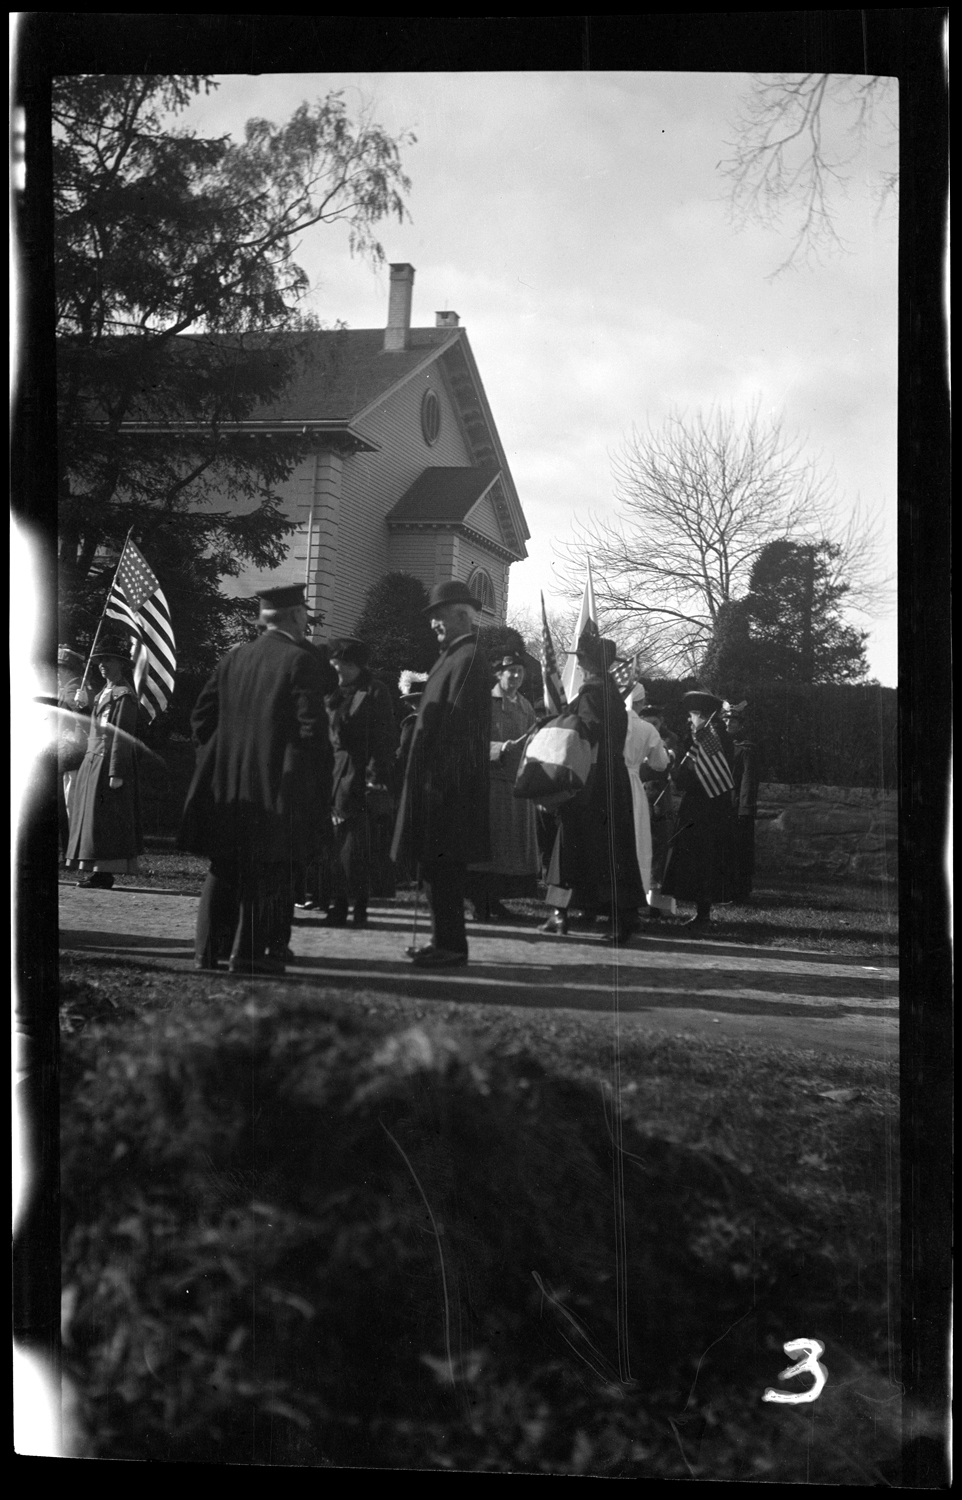 Spectators at the Welcome Home parade, October 18, 1919.